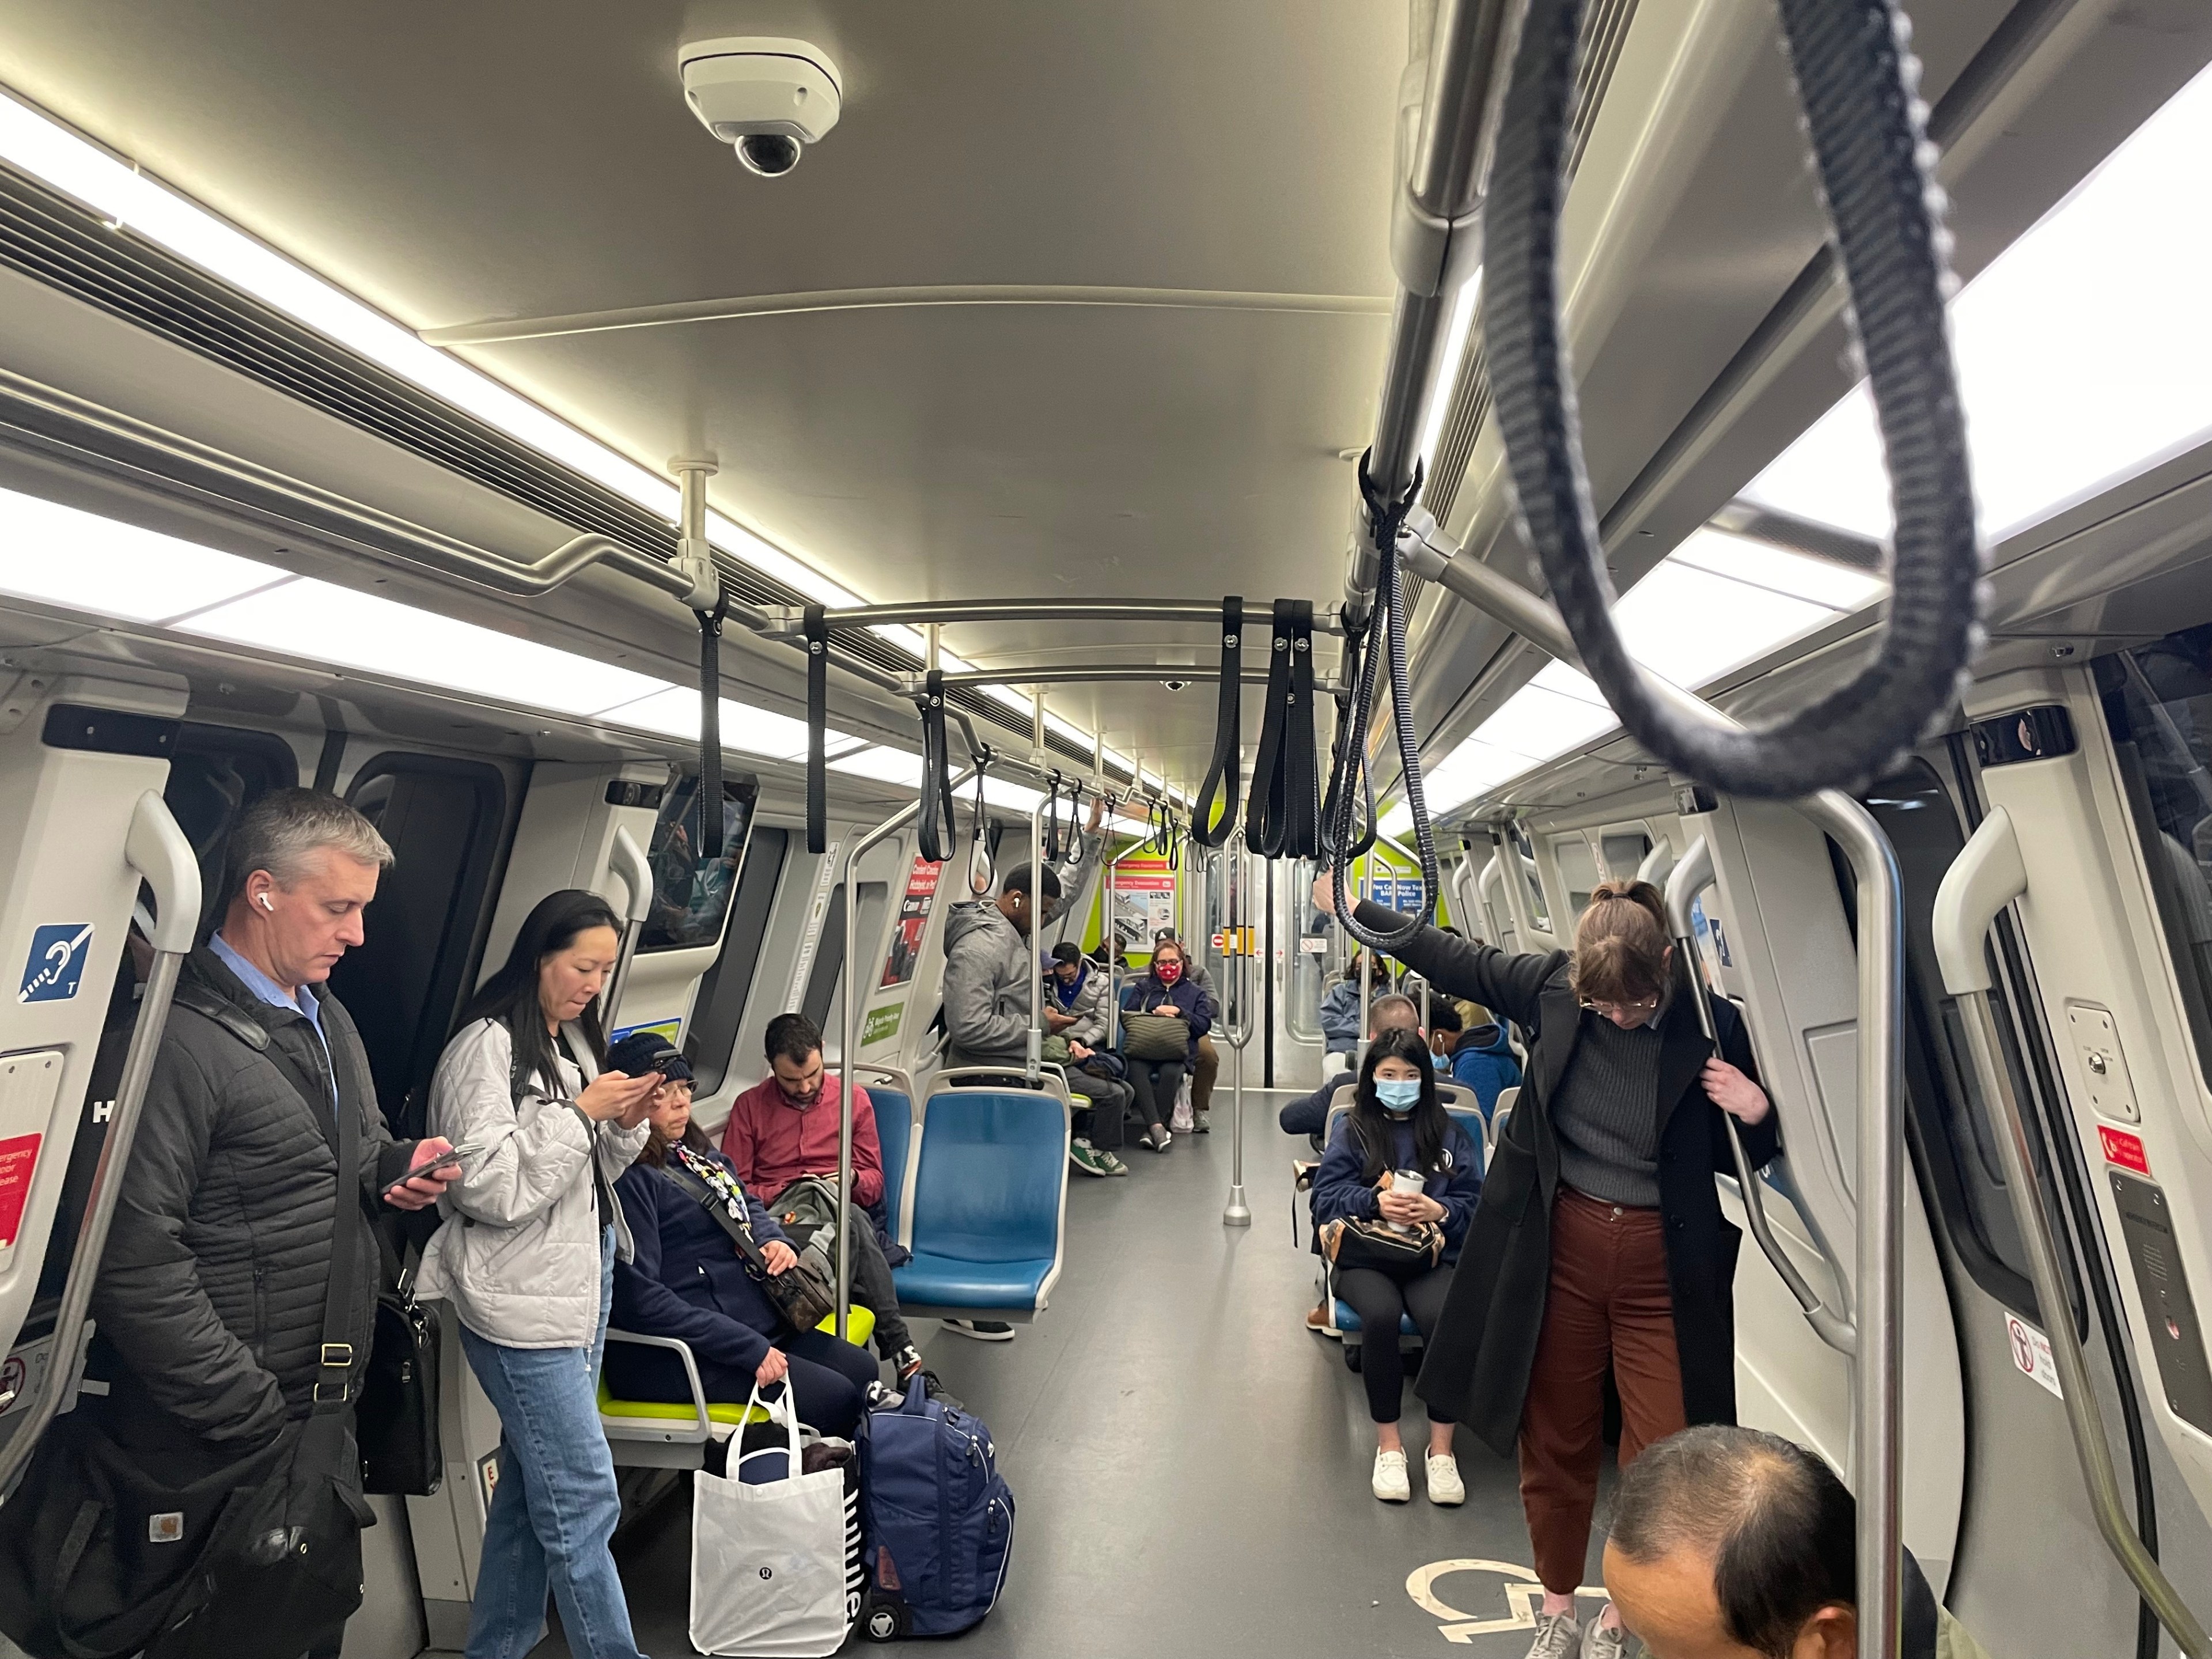 BART passengers ride a Blue line train heading from 12th Street station towards West Oakland station on Thursday.